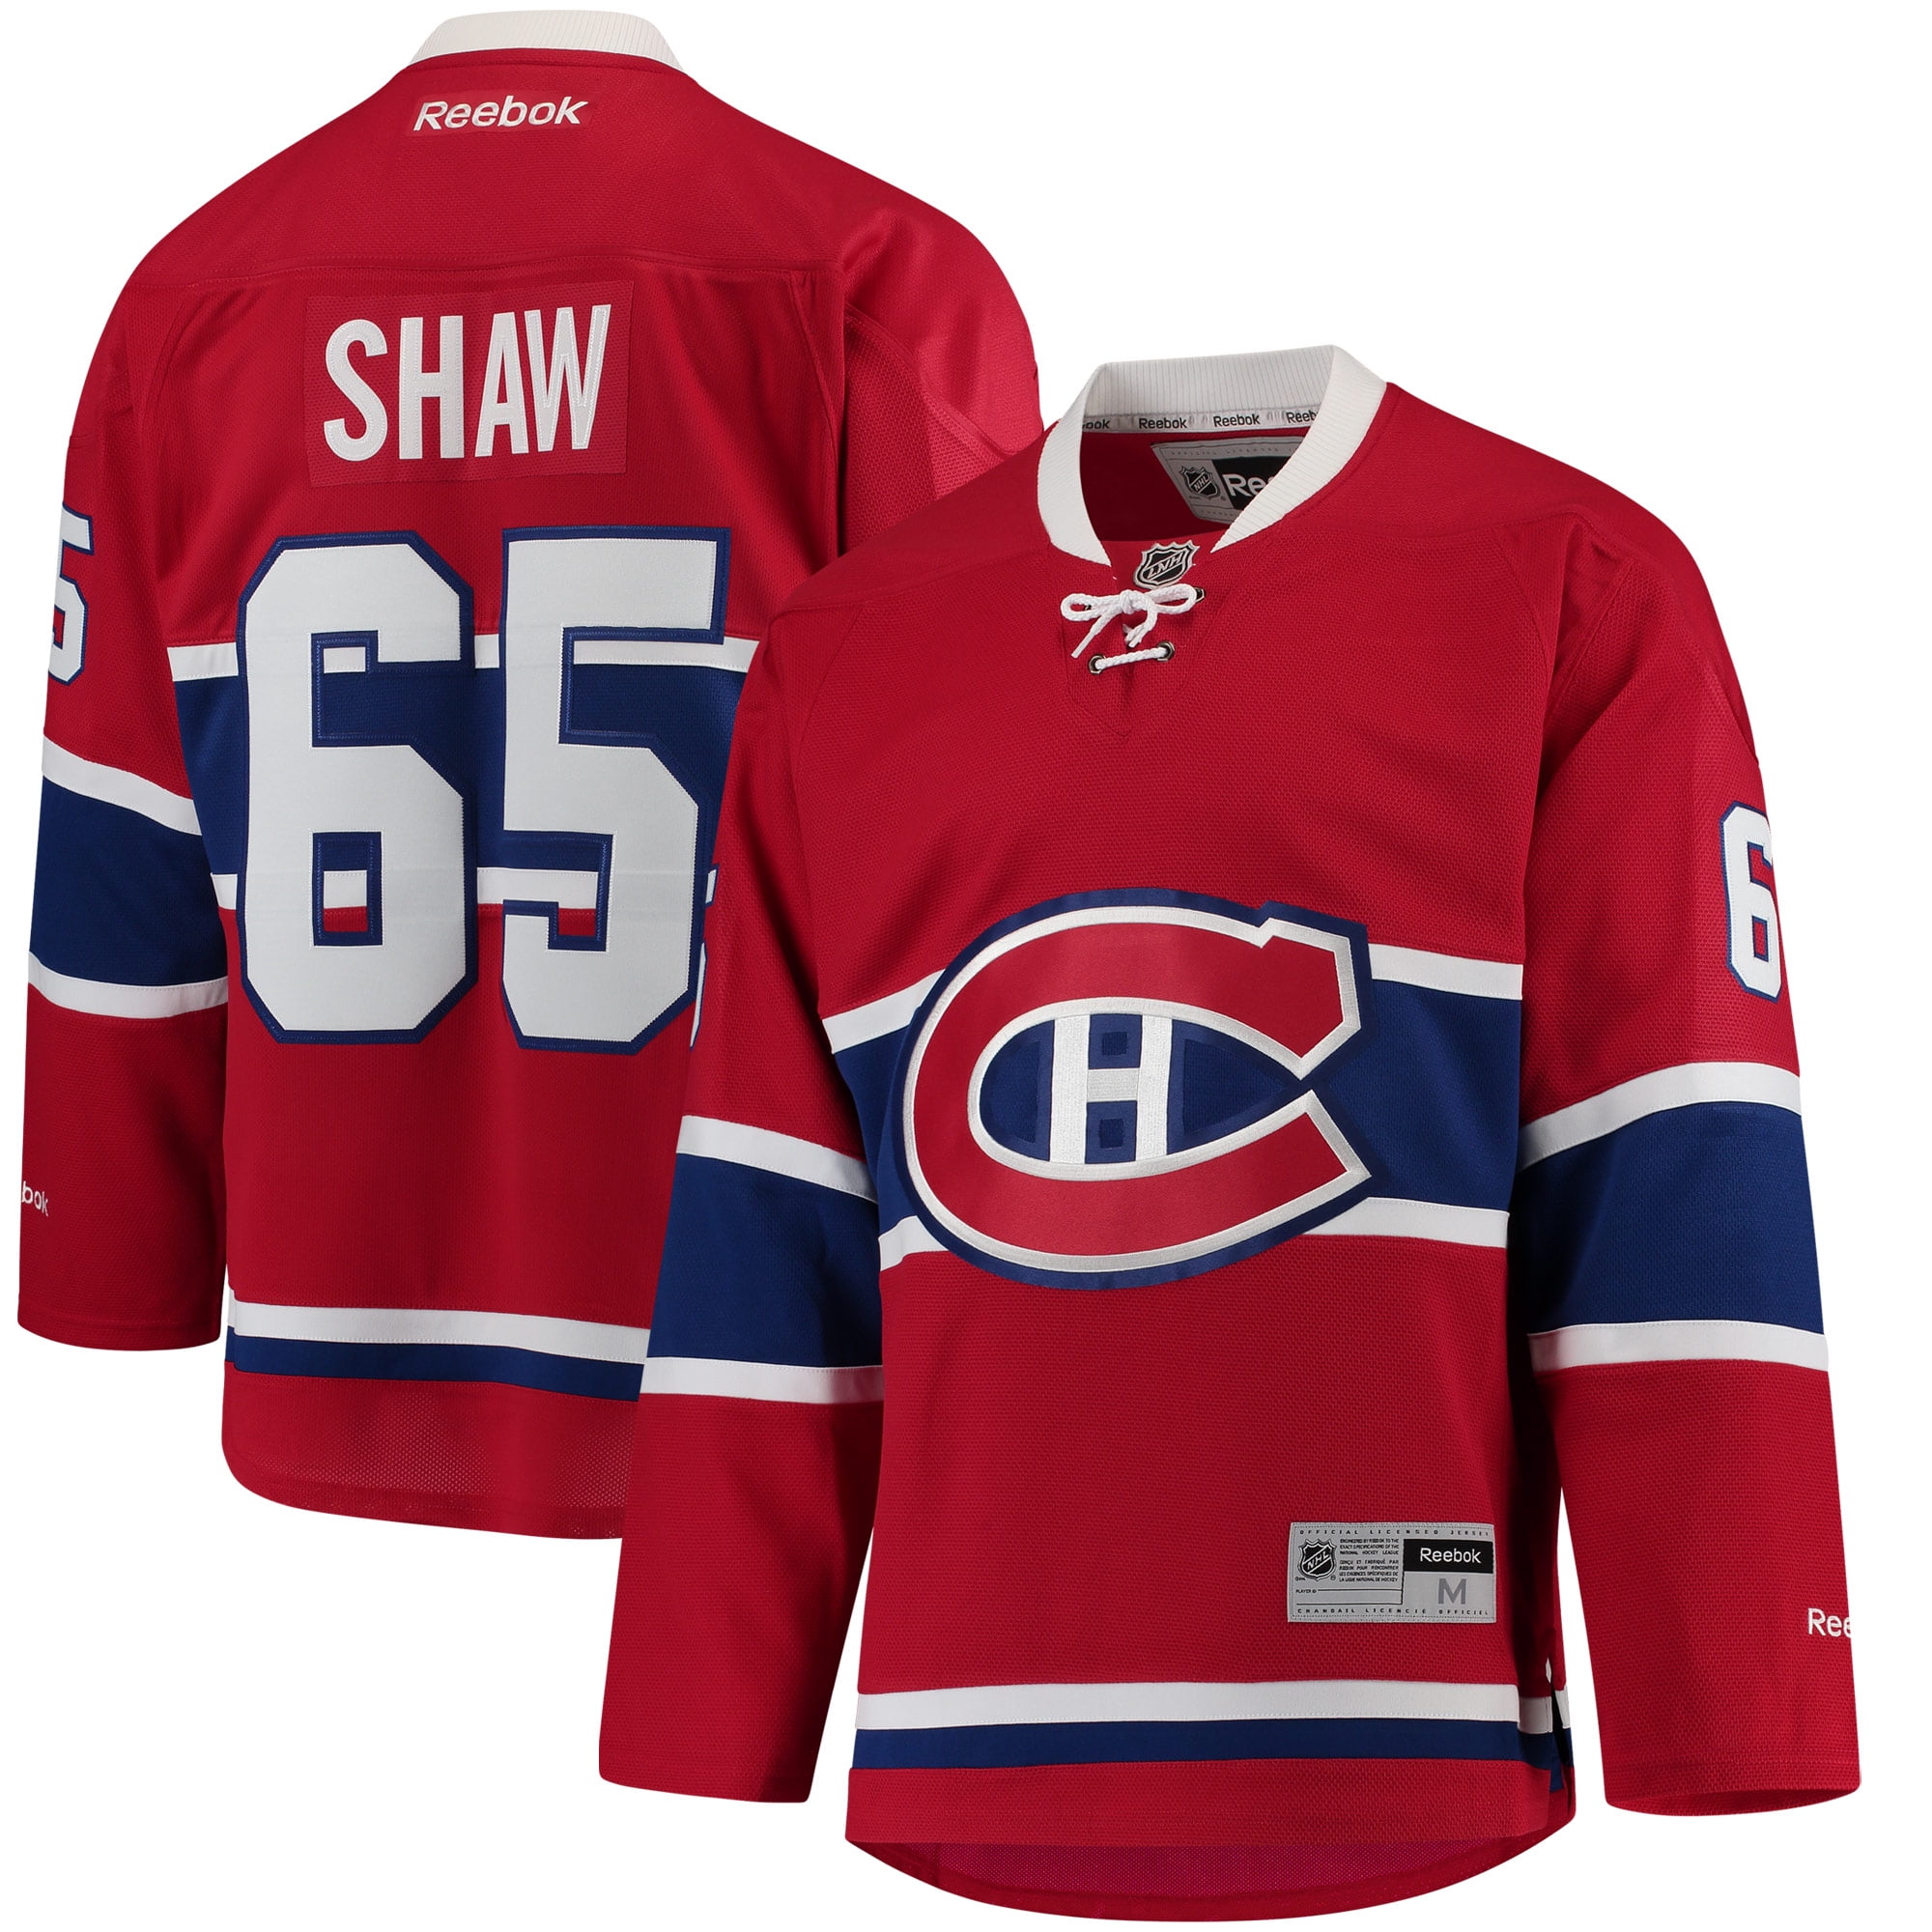 shaw canadiens jersey